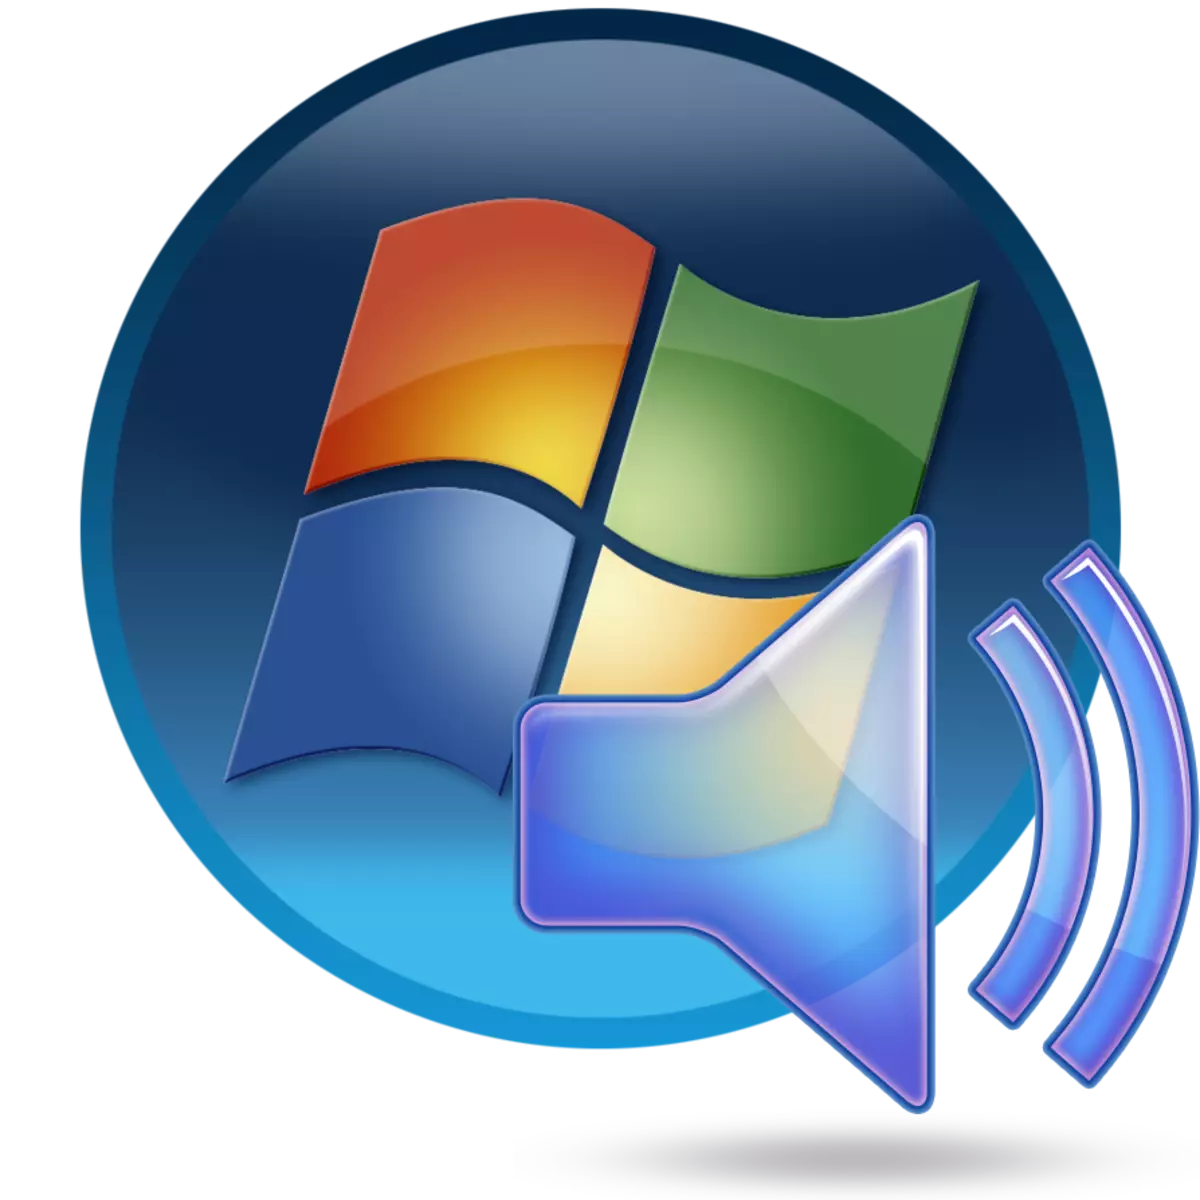 Installing a sound device on a PC with Windows 7